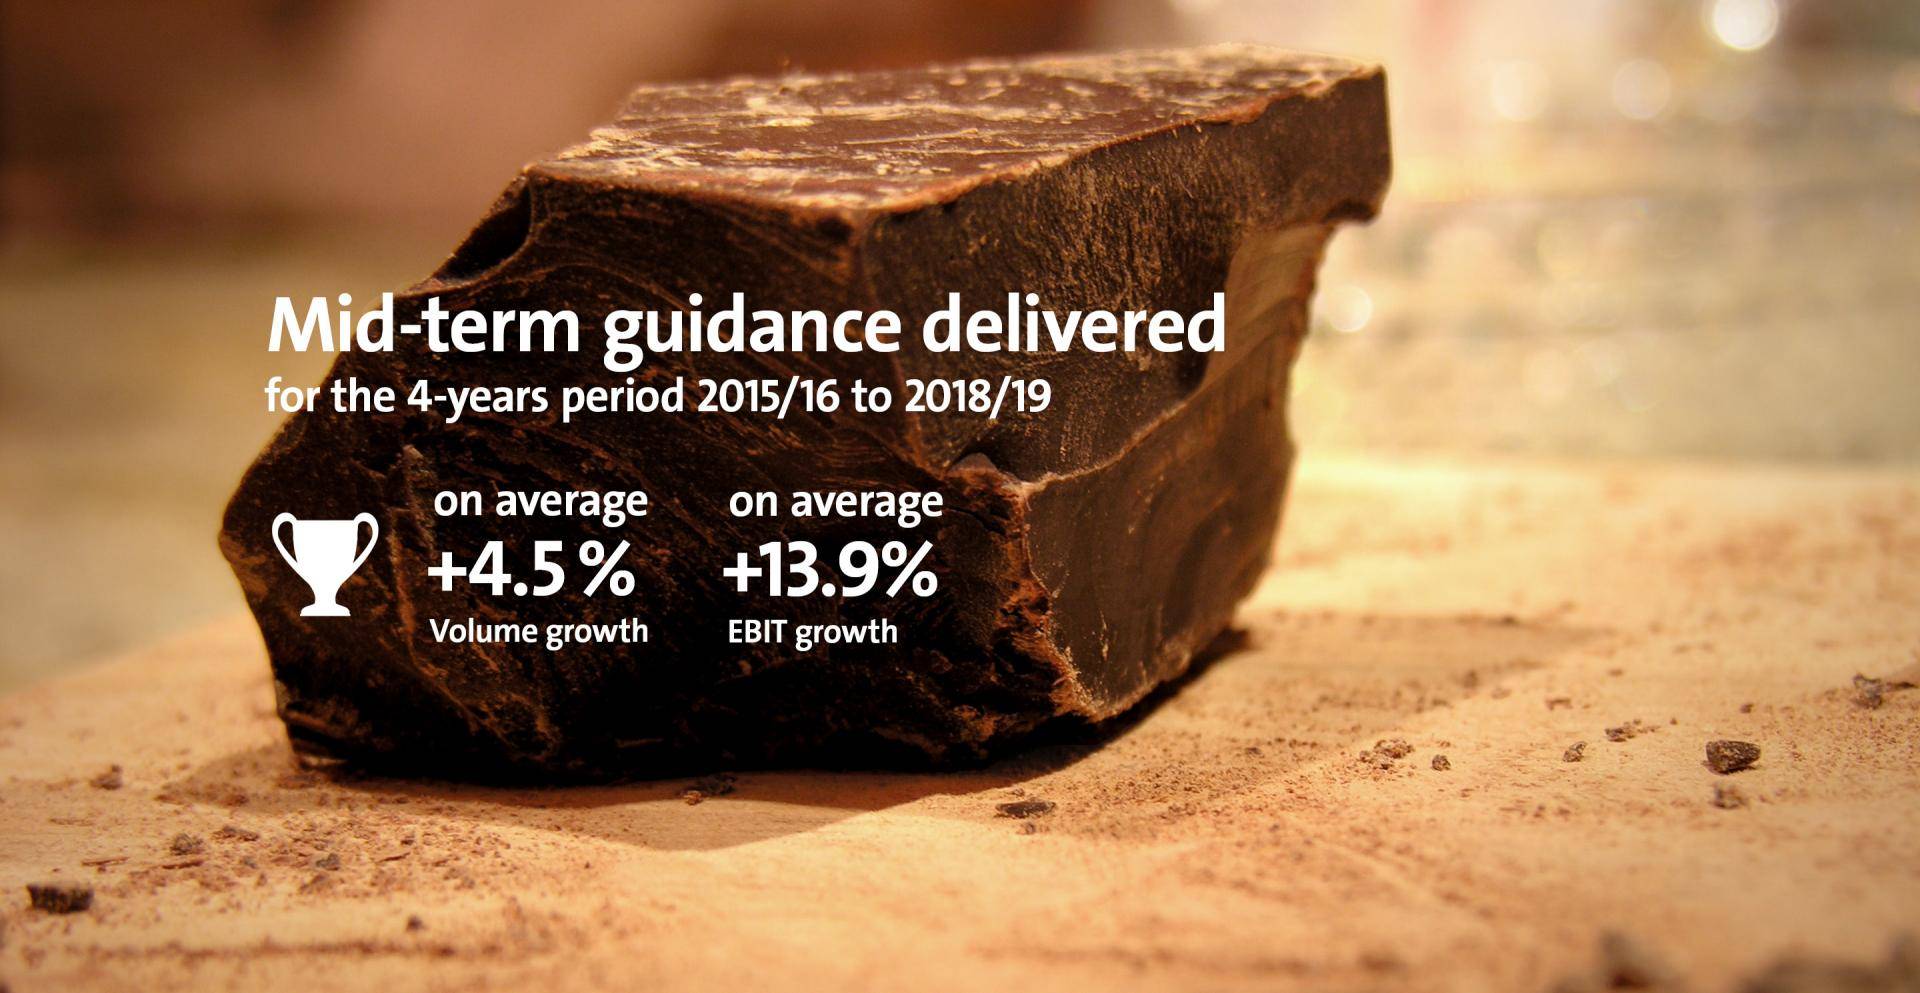 Image Slider Mid-term guidance Fiscal Year 2018/19 Barry Callebaut